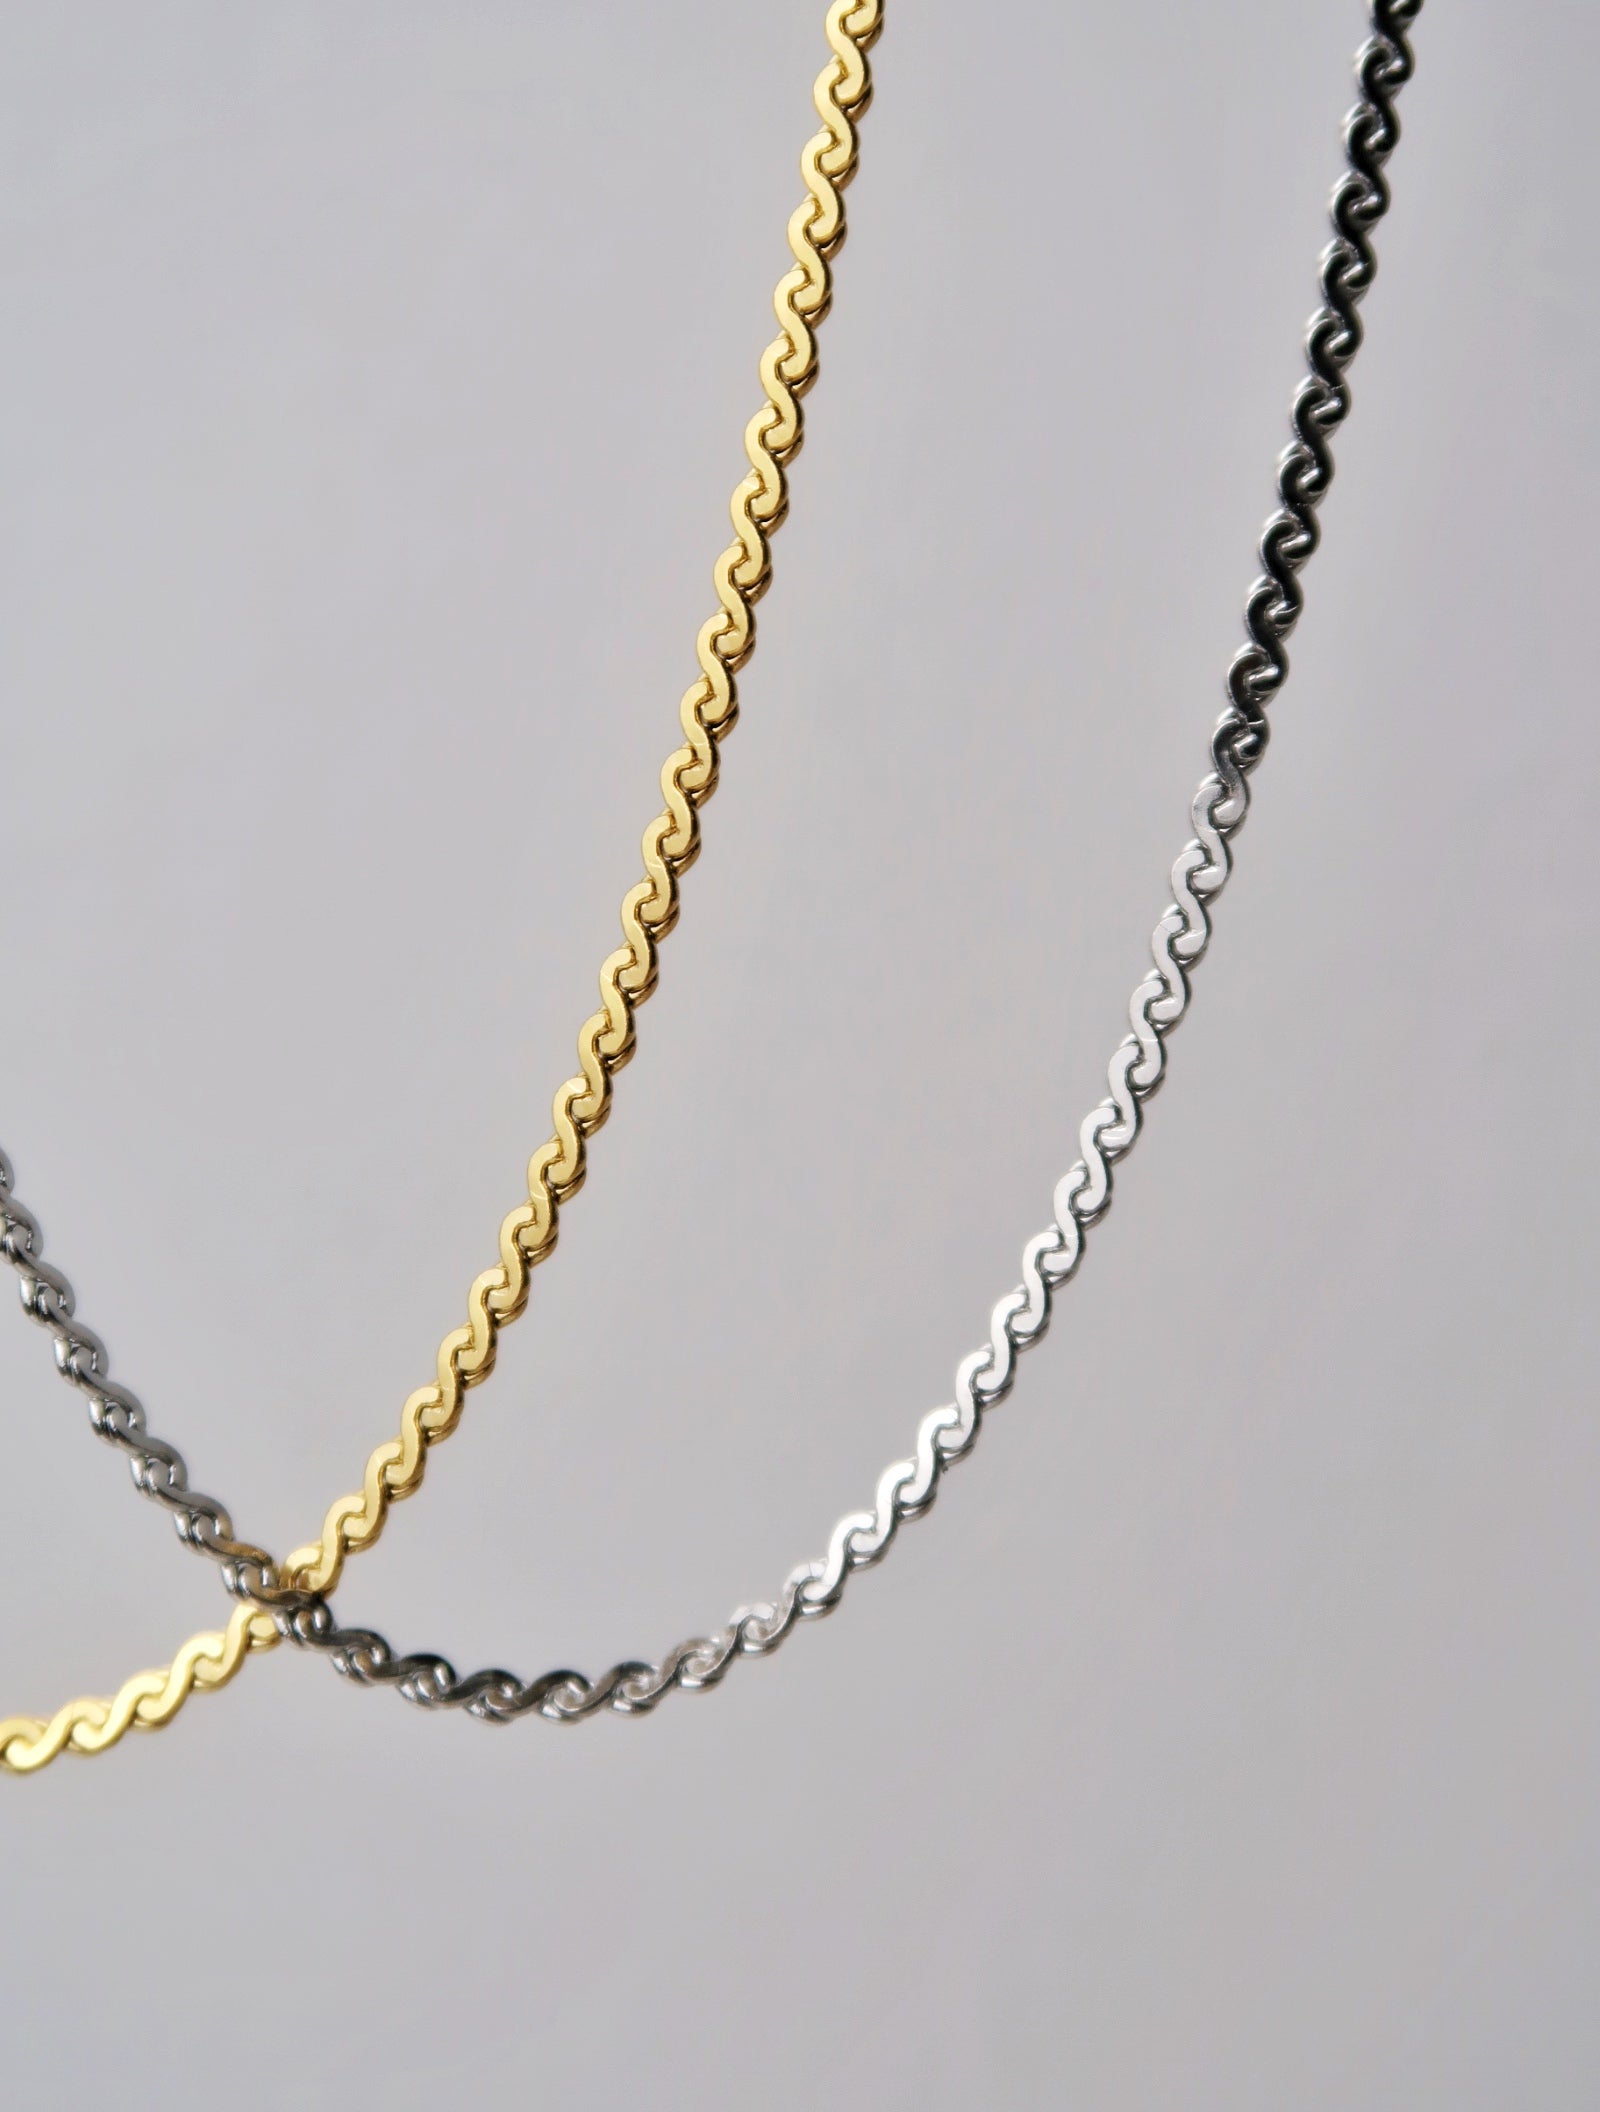 Spiral Chain Necklace - Esah and Co